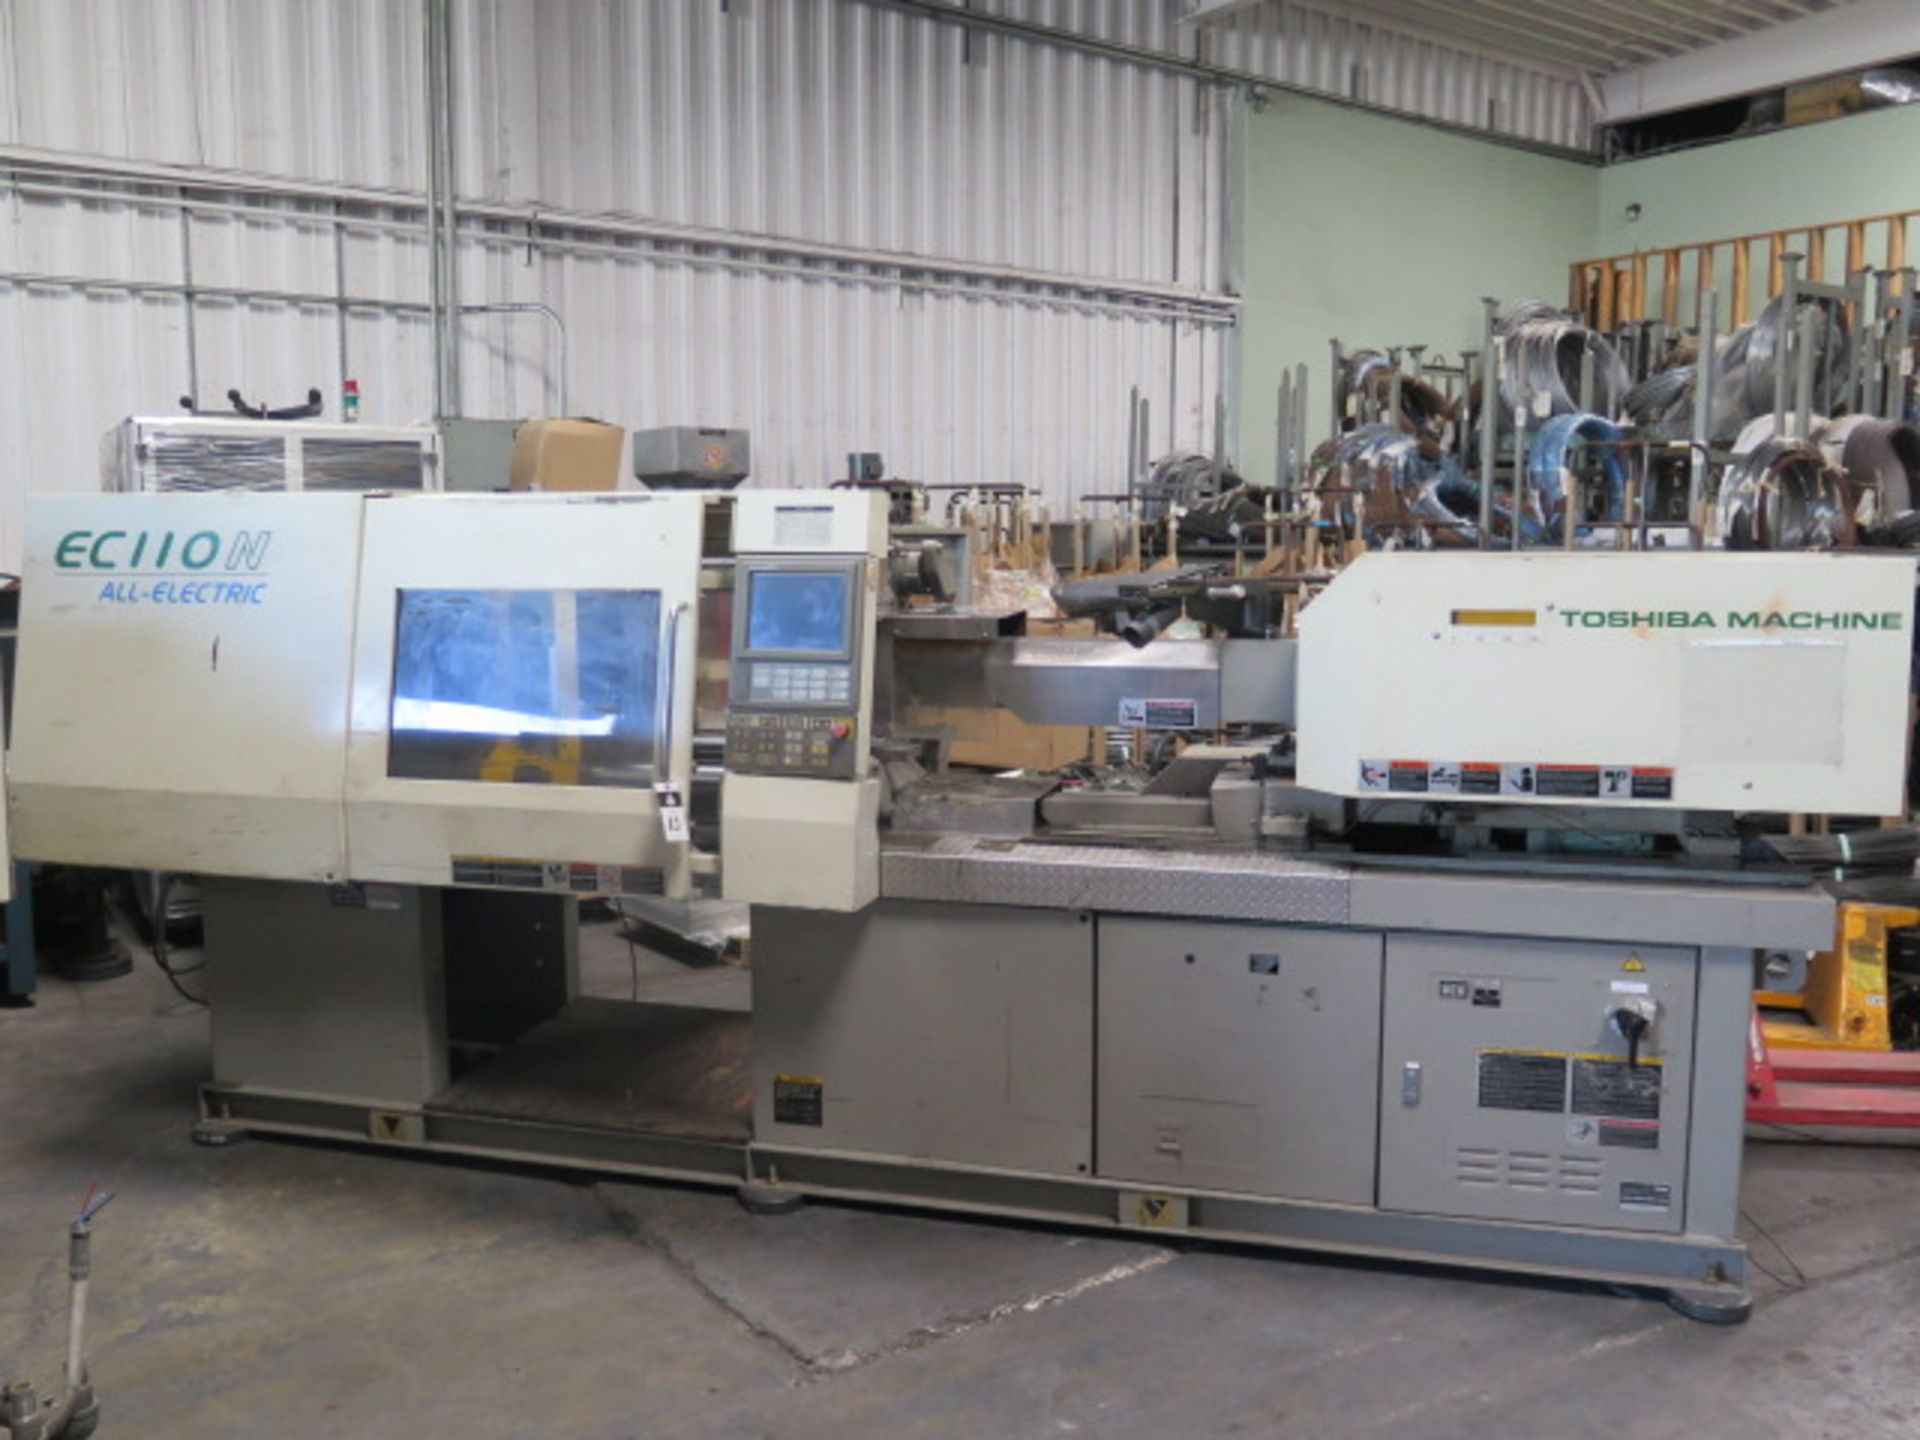 Toshiba EC110NV21-2 110 Ton CNC All Electric Plastic Injection Molding Machine s/n B1J138,SOLD AS IS - Image 3 of 14